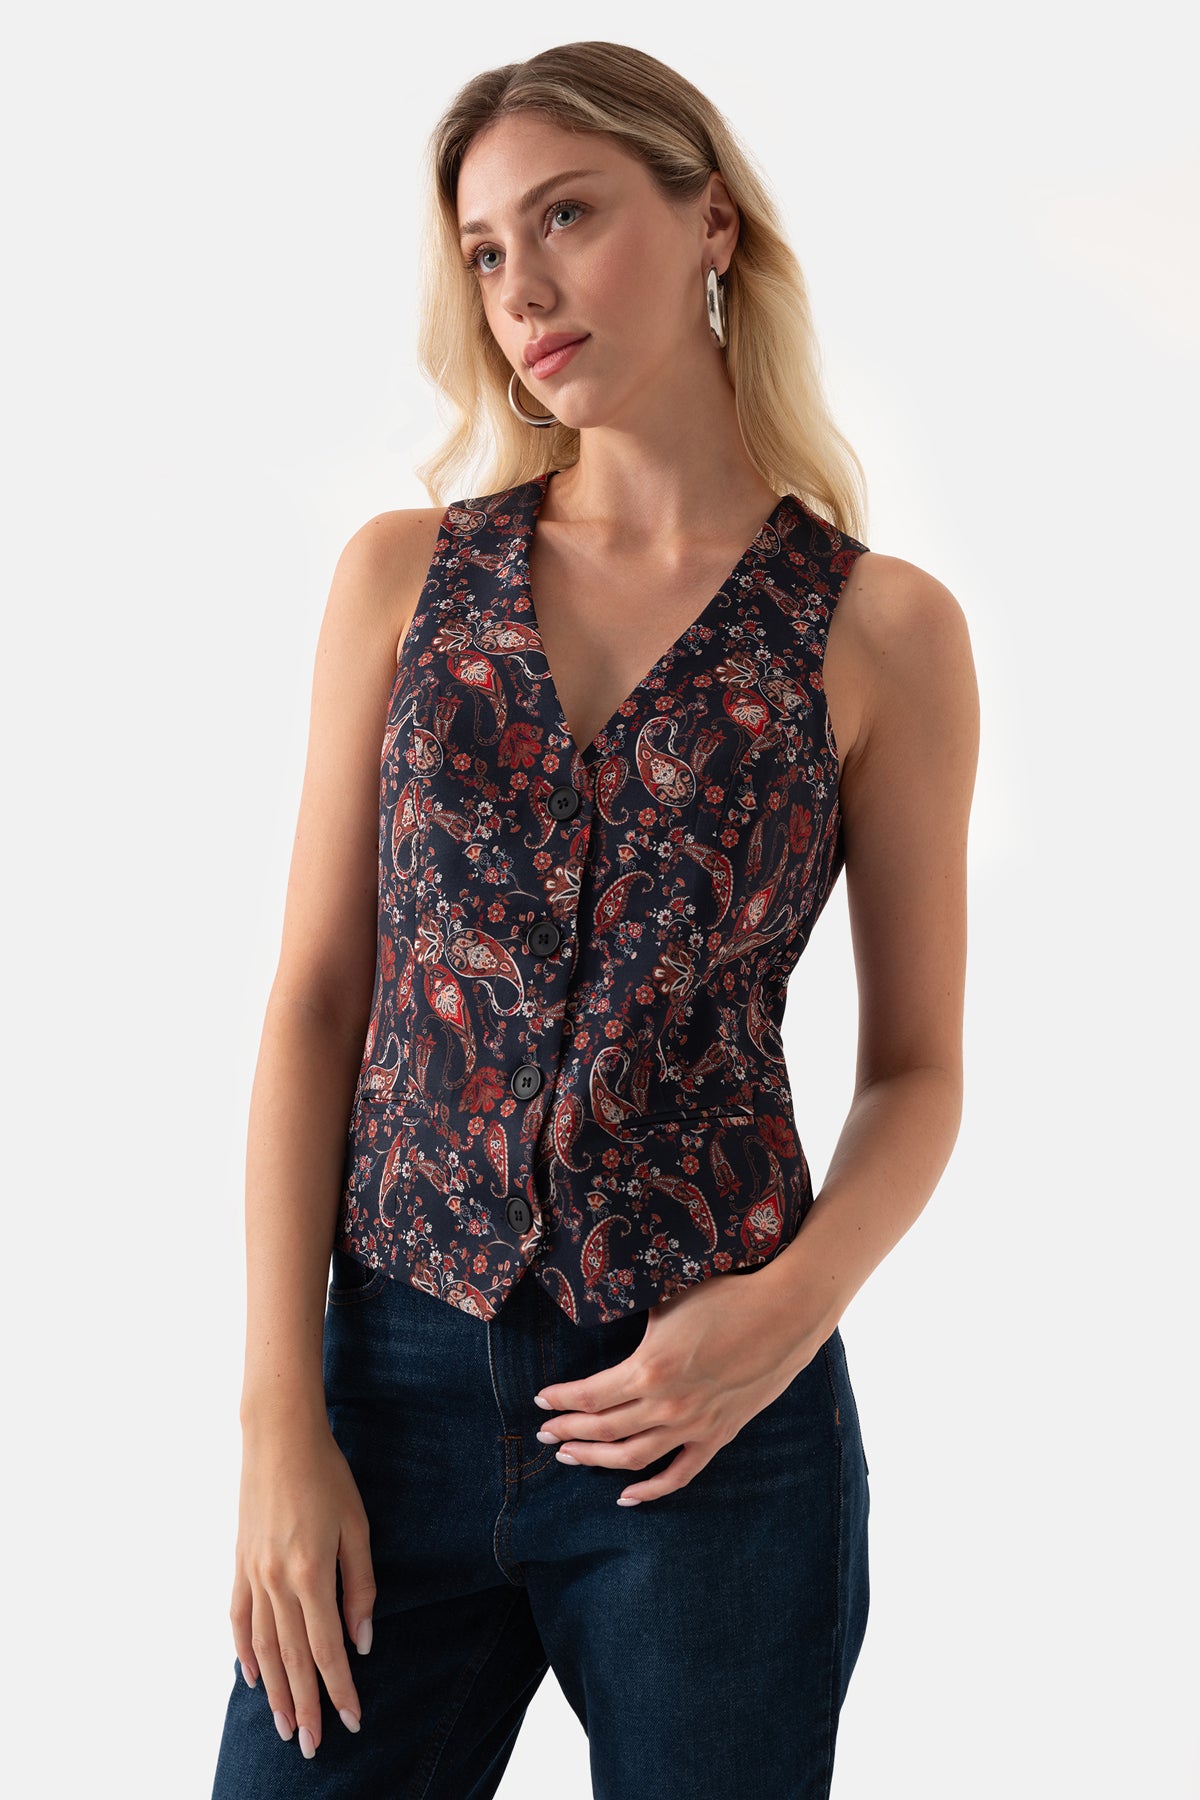 Navy Blue Paisley Patterned Button Front Lined Women's Vest